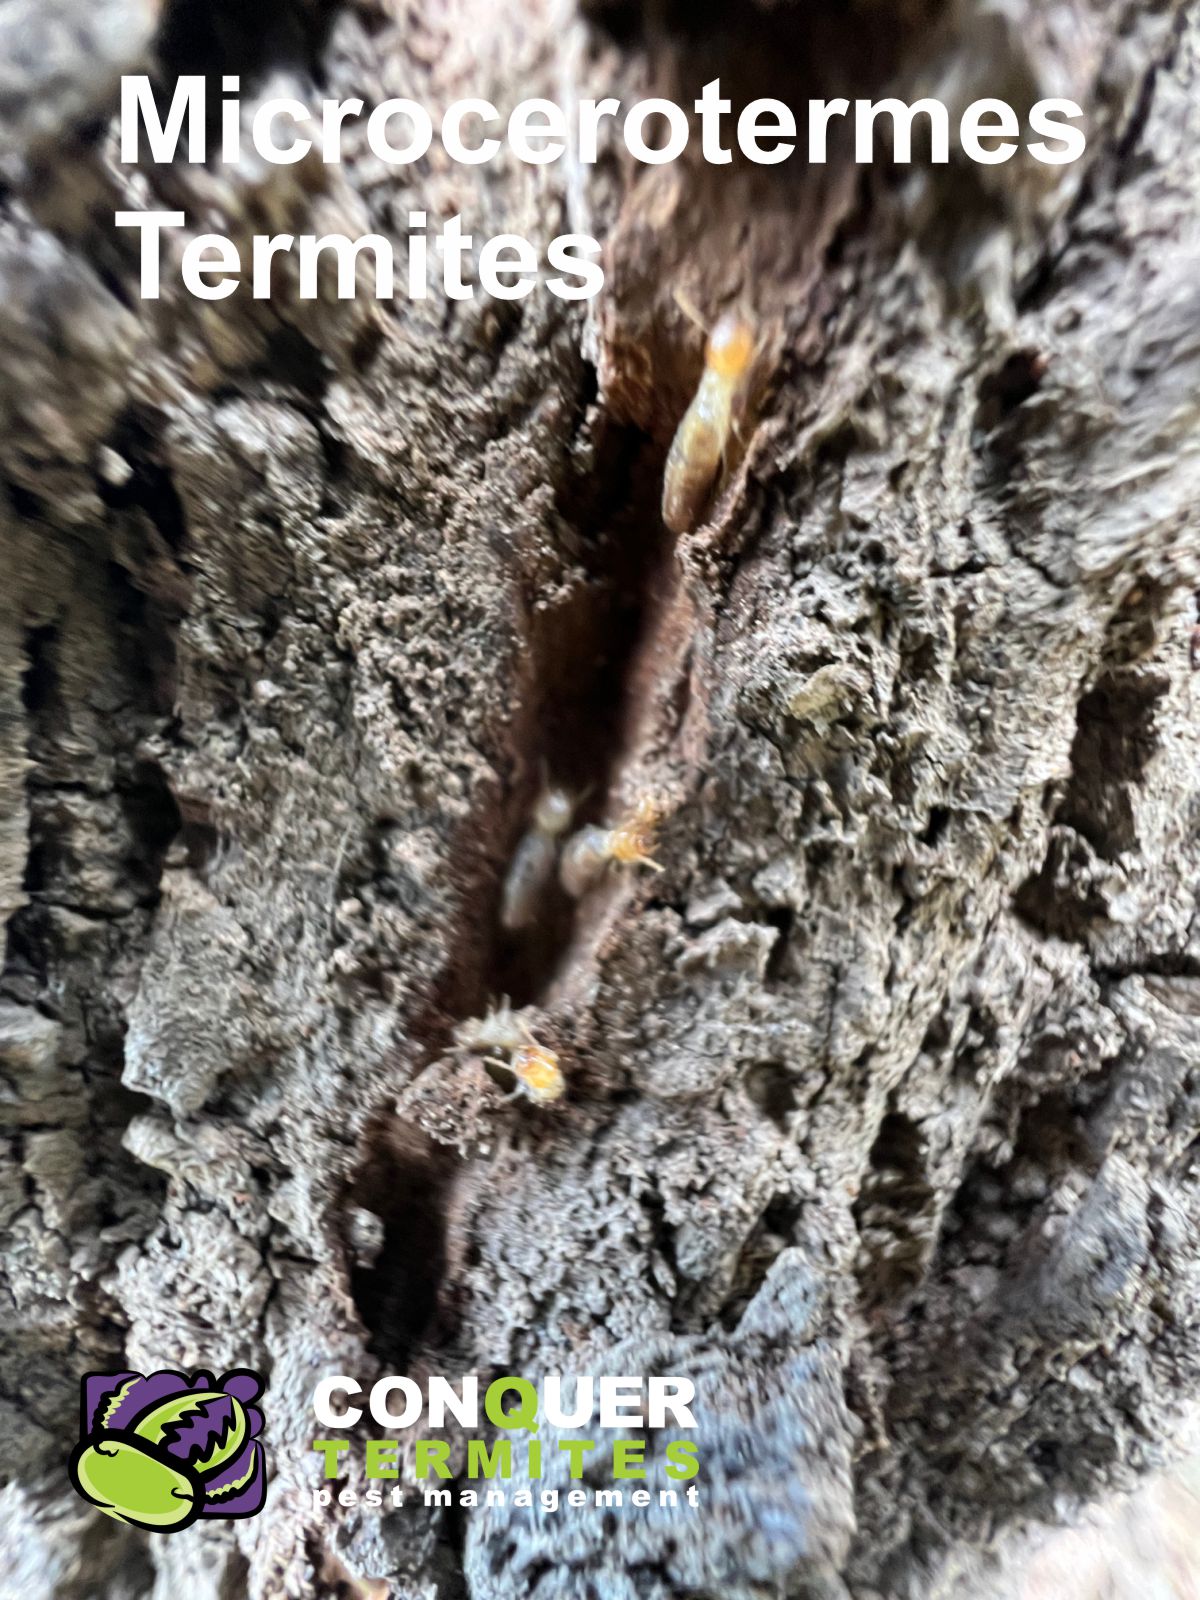 Microcerotermes Termites, are they a threat?